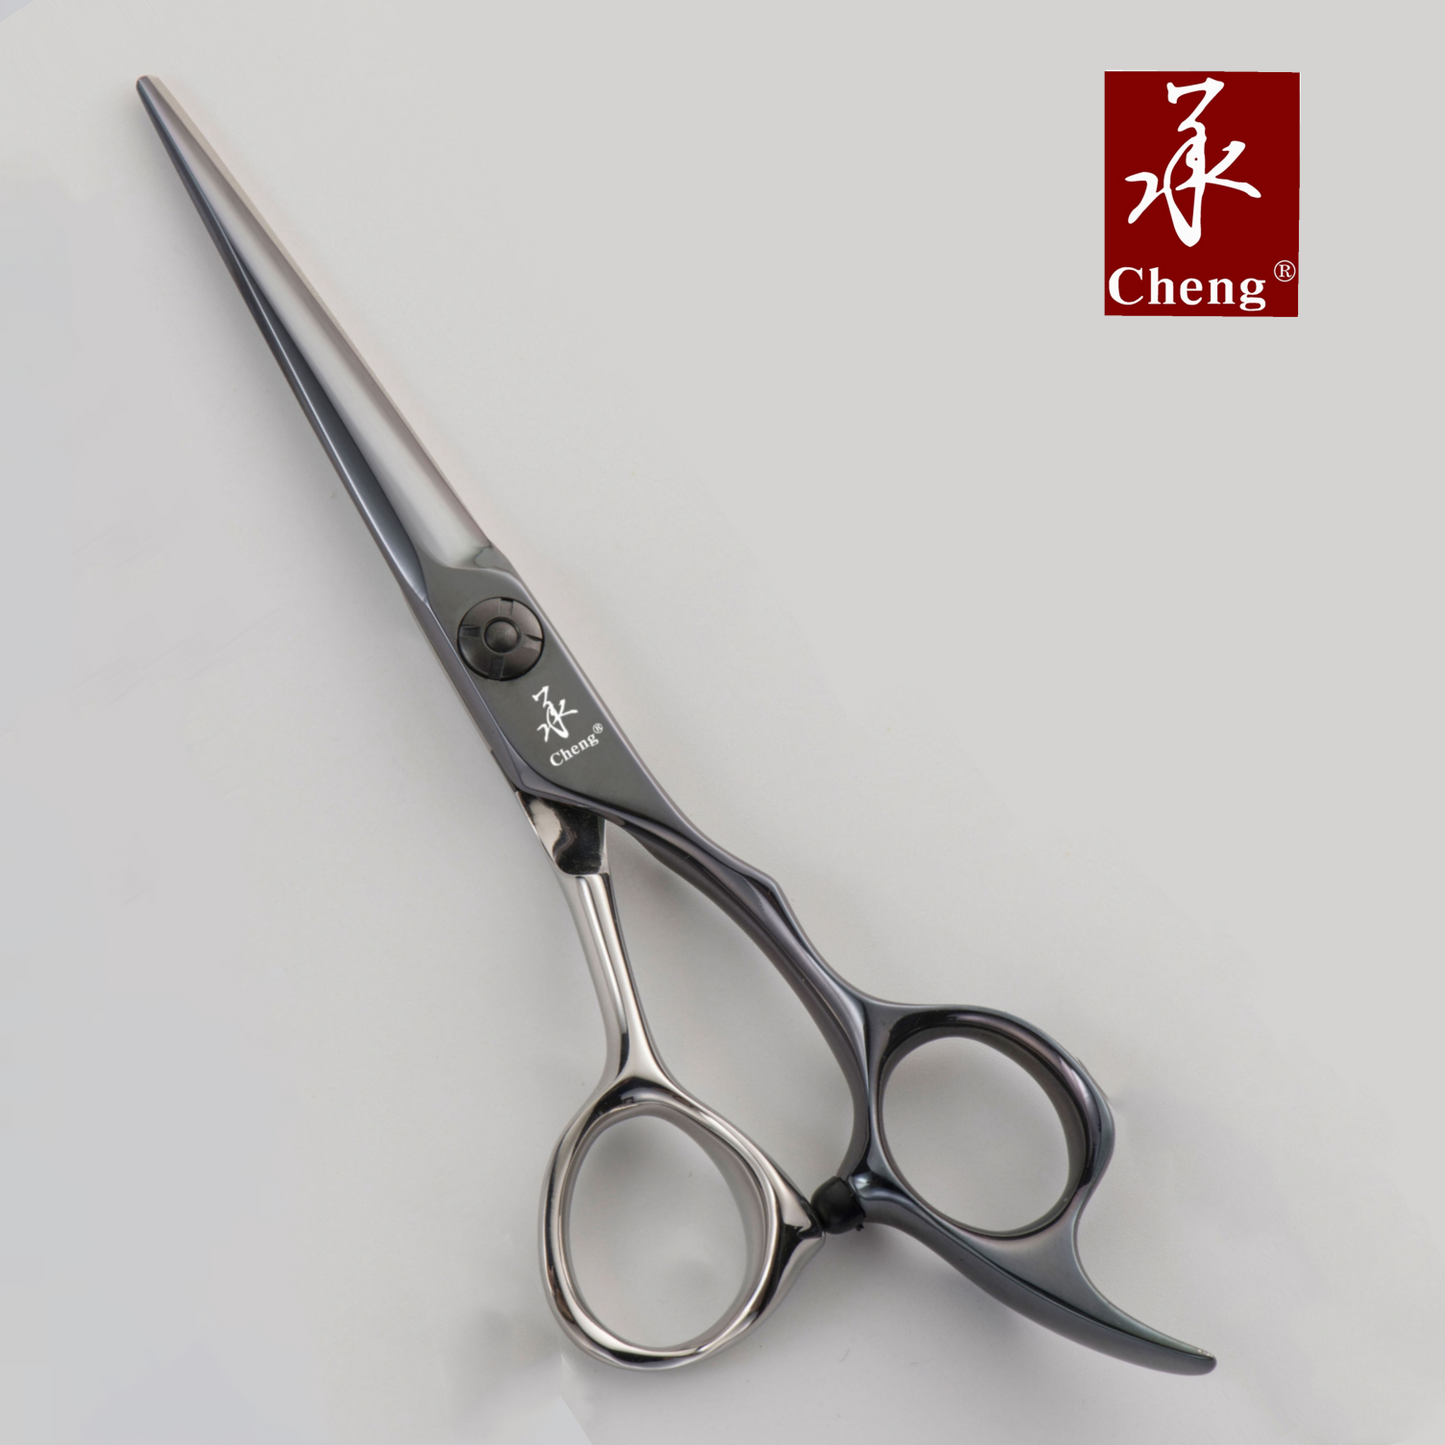 VD-614TZX DLC Hair Thinning Scissors 6.0 Inch 14T About=45%